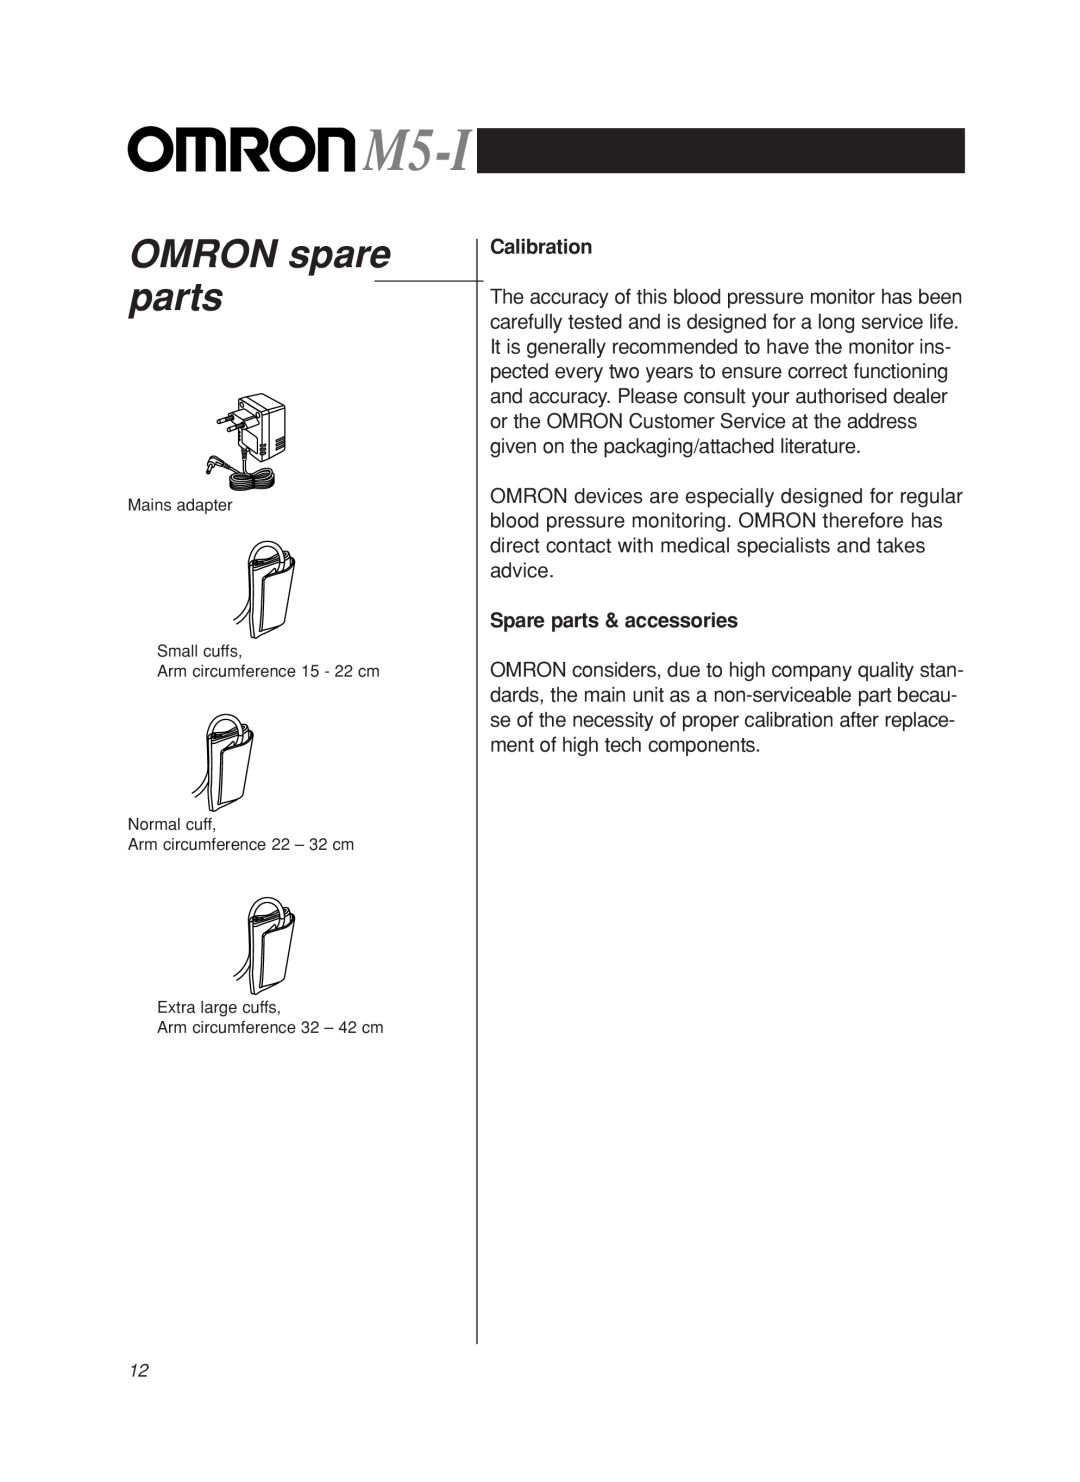 Omron M5-I instruction manual OMRON spare parts, Calibration, Spare parts & accessories 